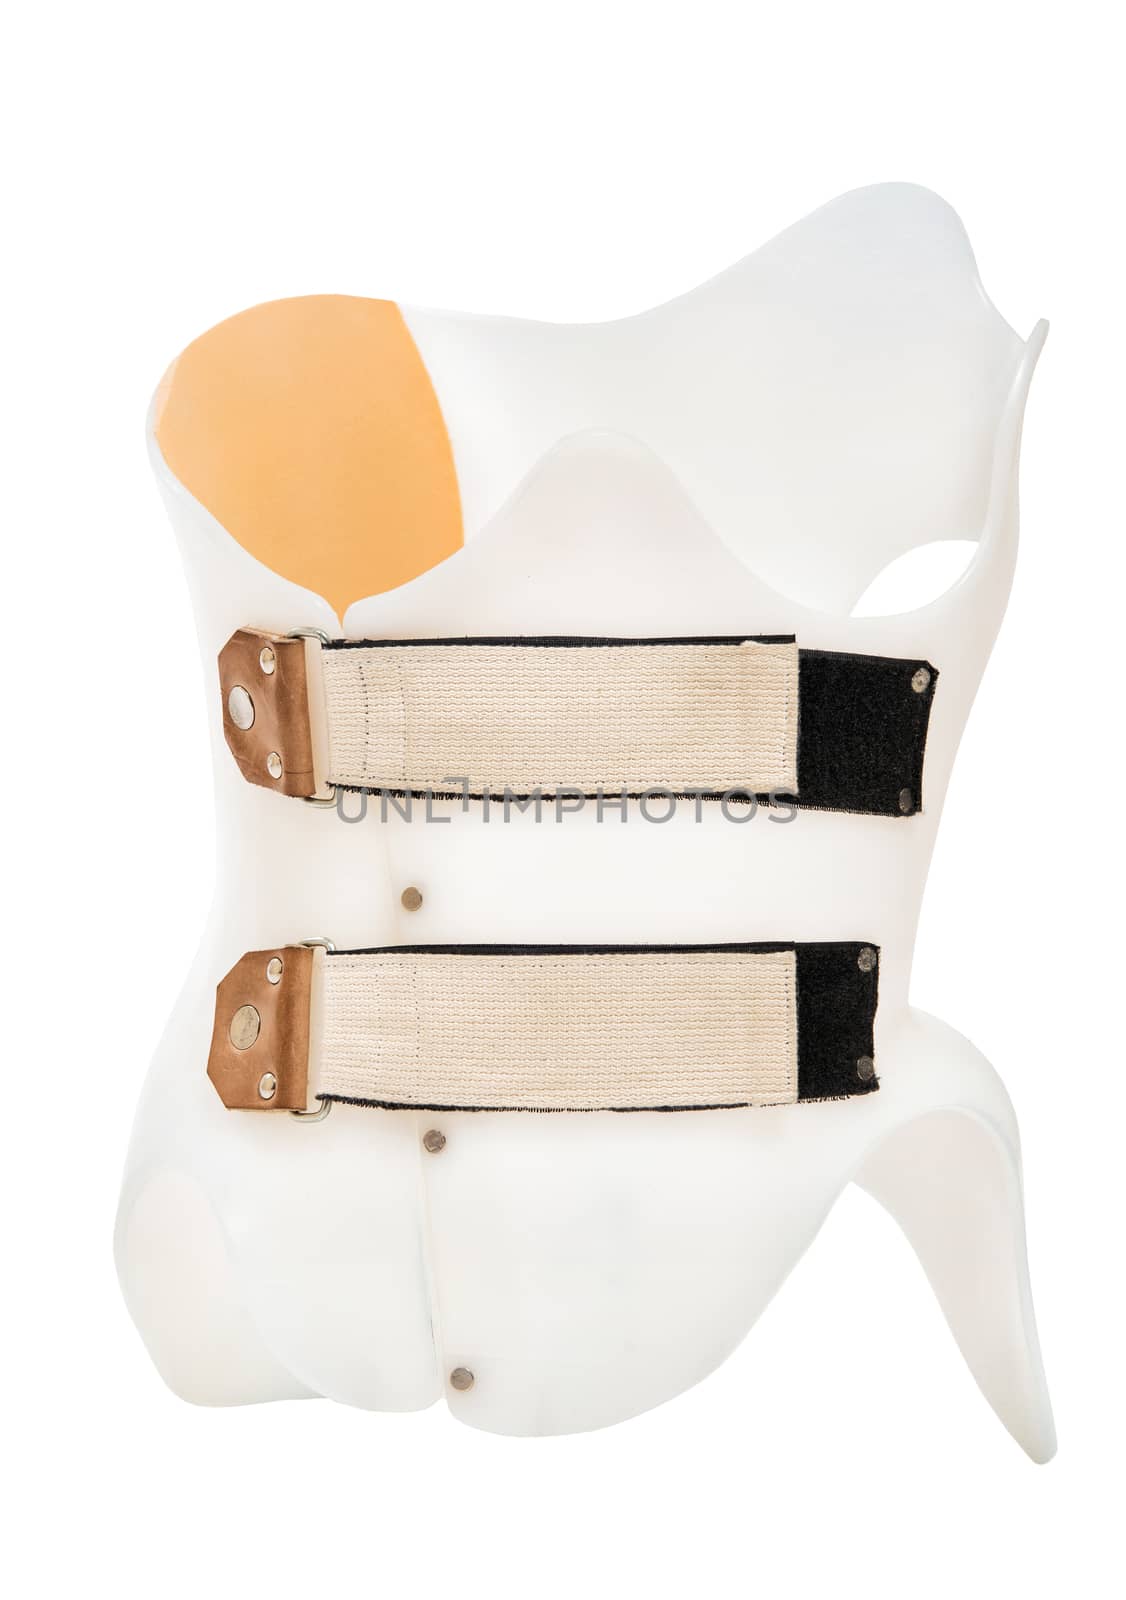 Corset Chenot. The correction device for the treatment of scoliosis. Isolated on white background. 